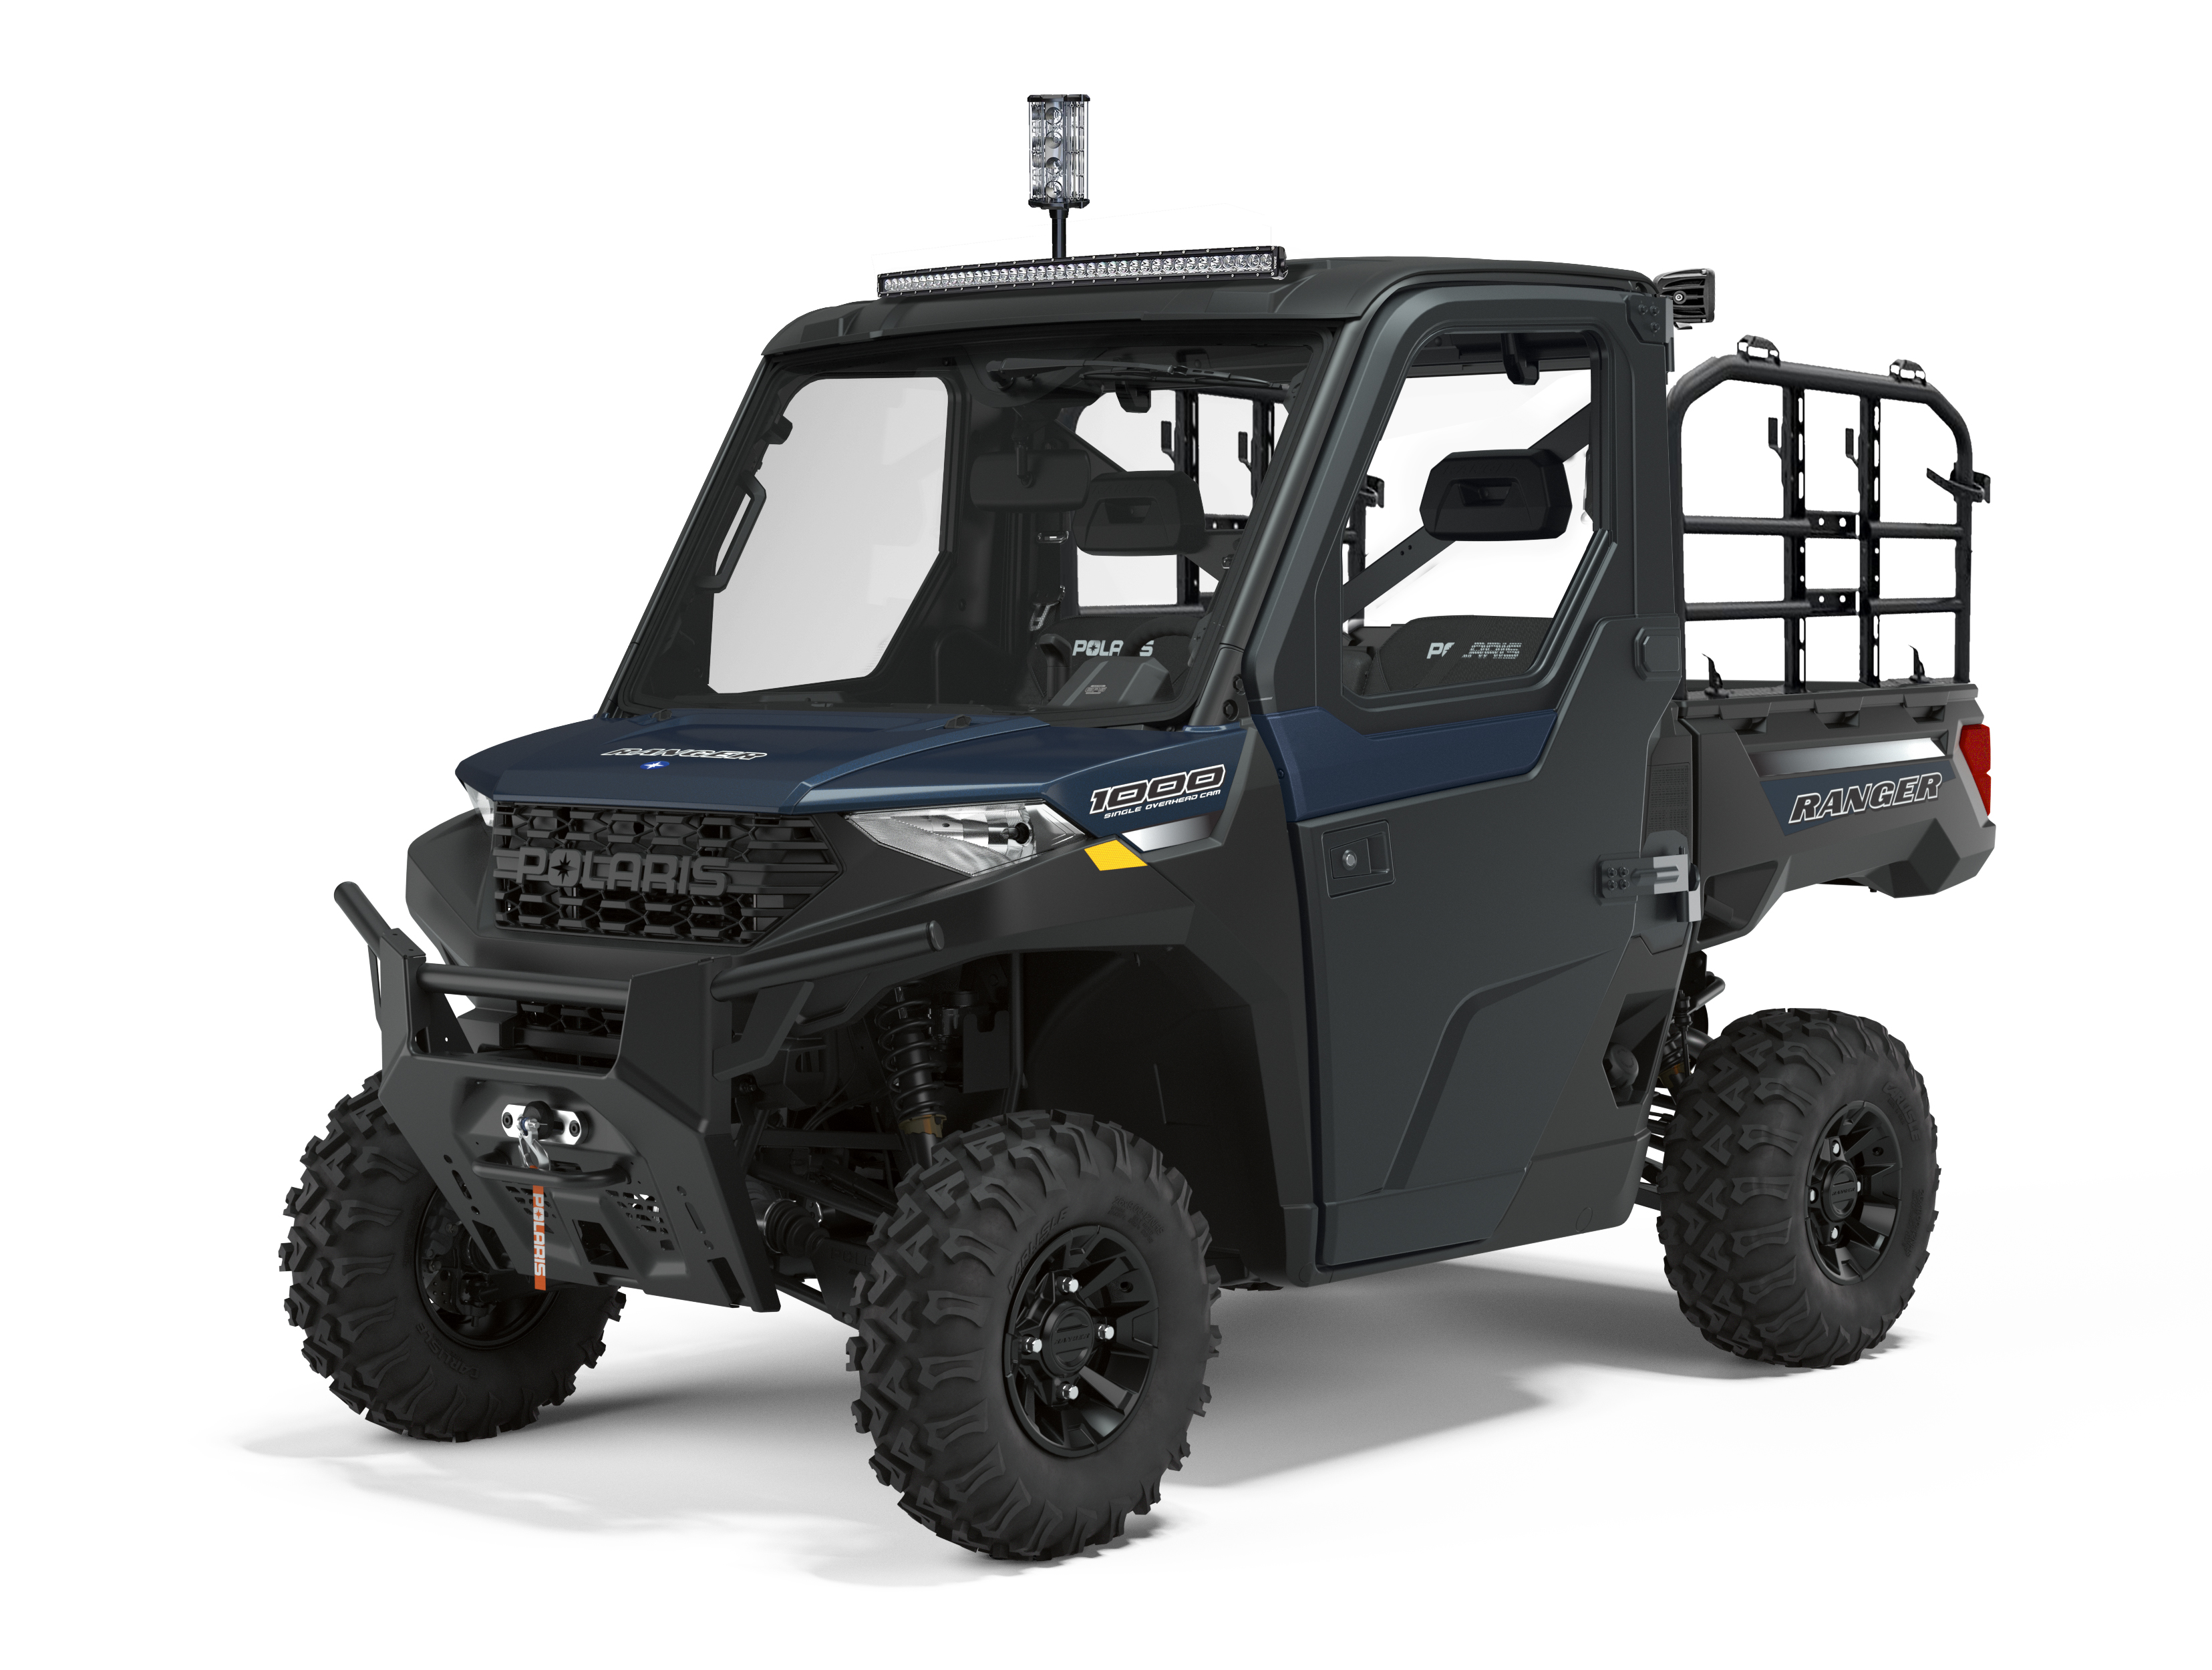 The Grand Prize - 2021 RANGER 1000 EPS Premium with additional accessories, valued at over $31,000